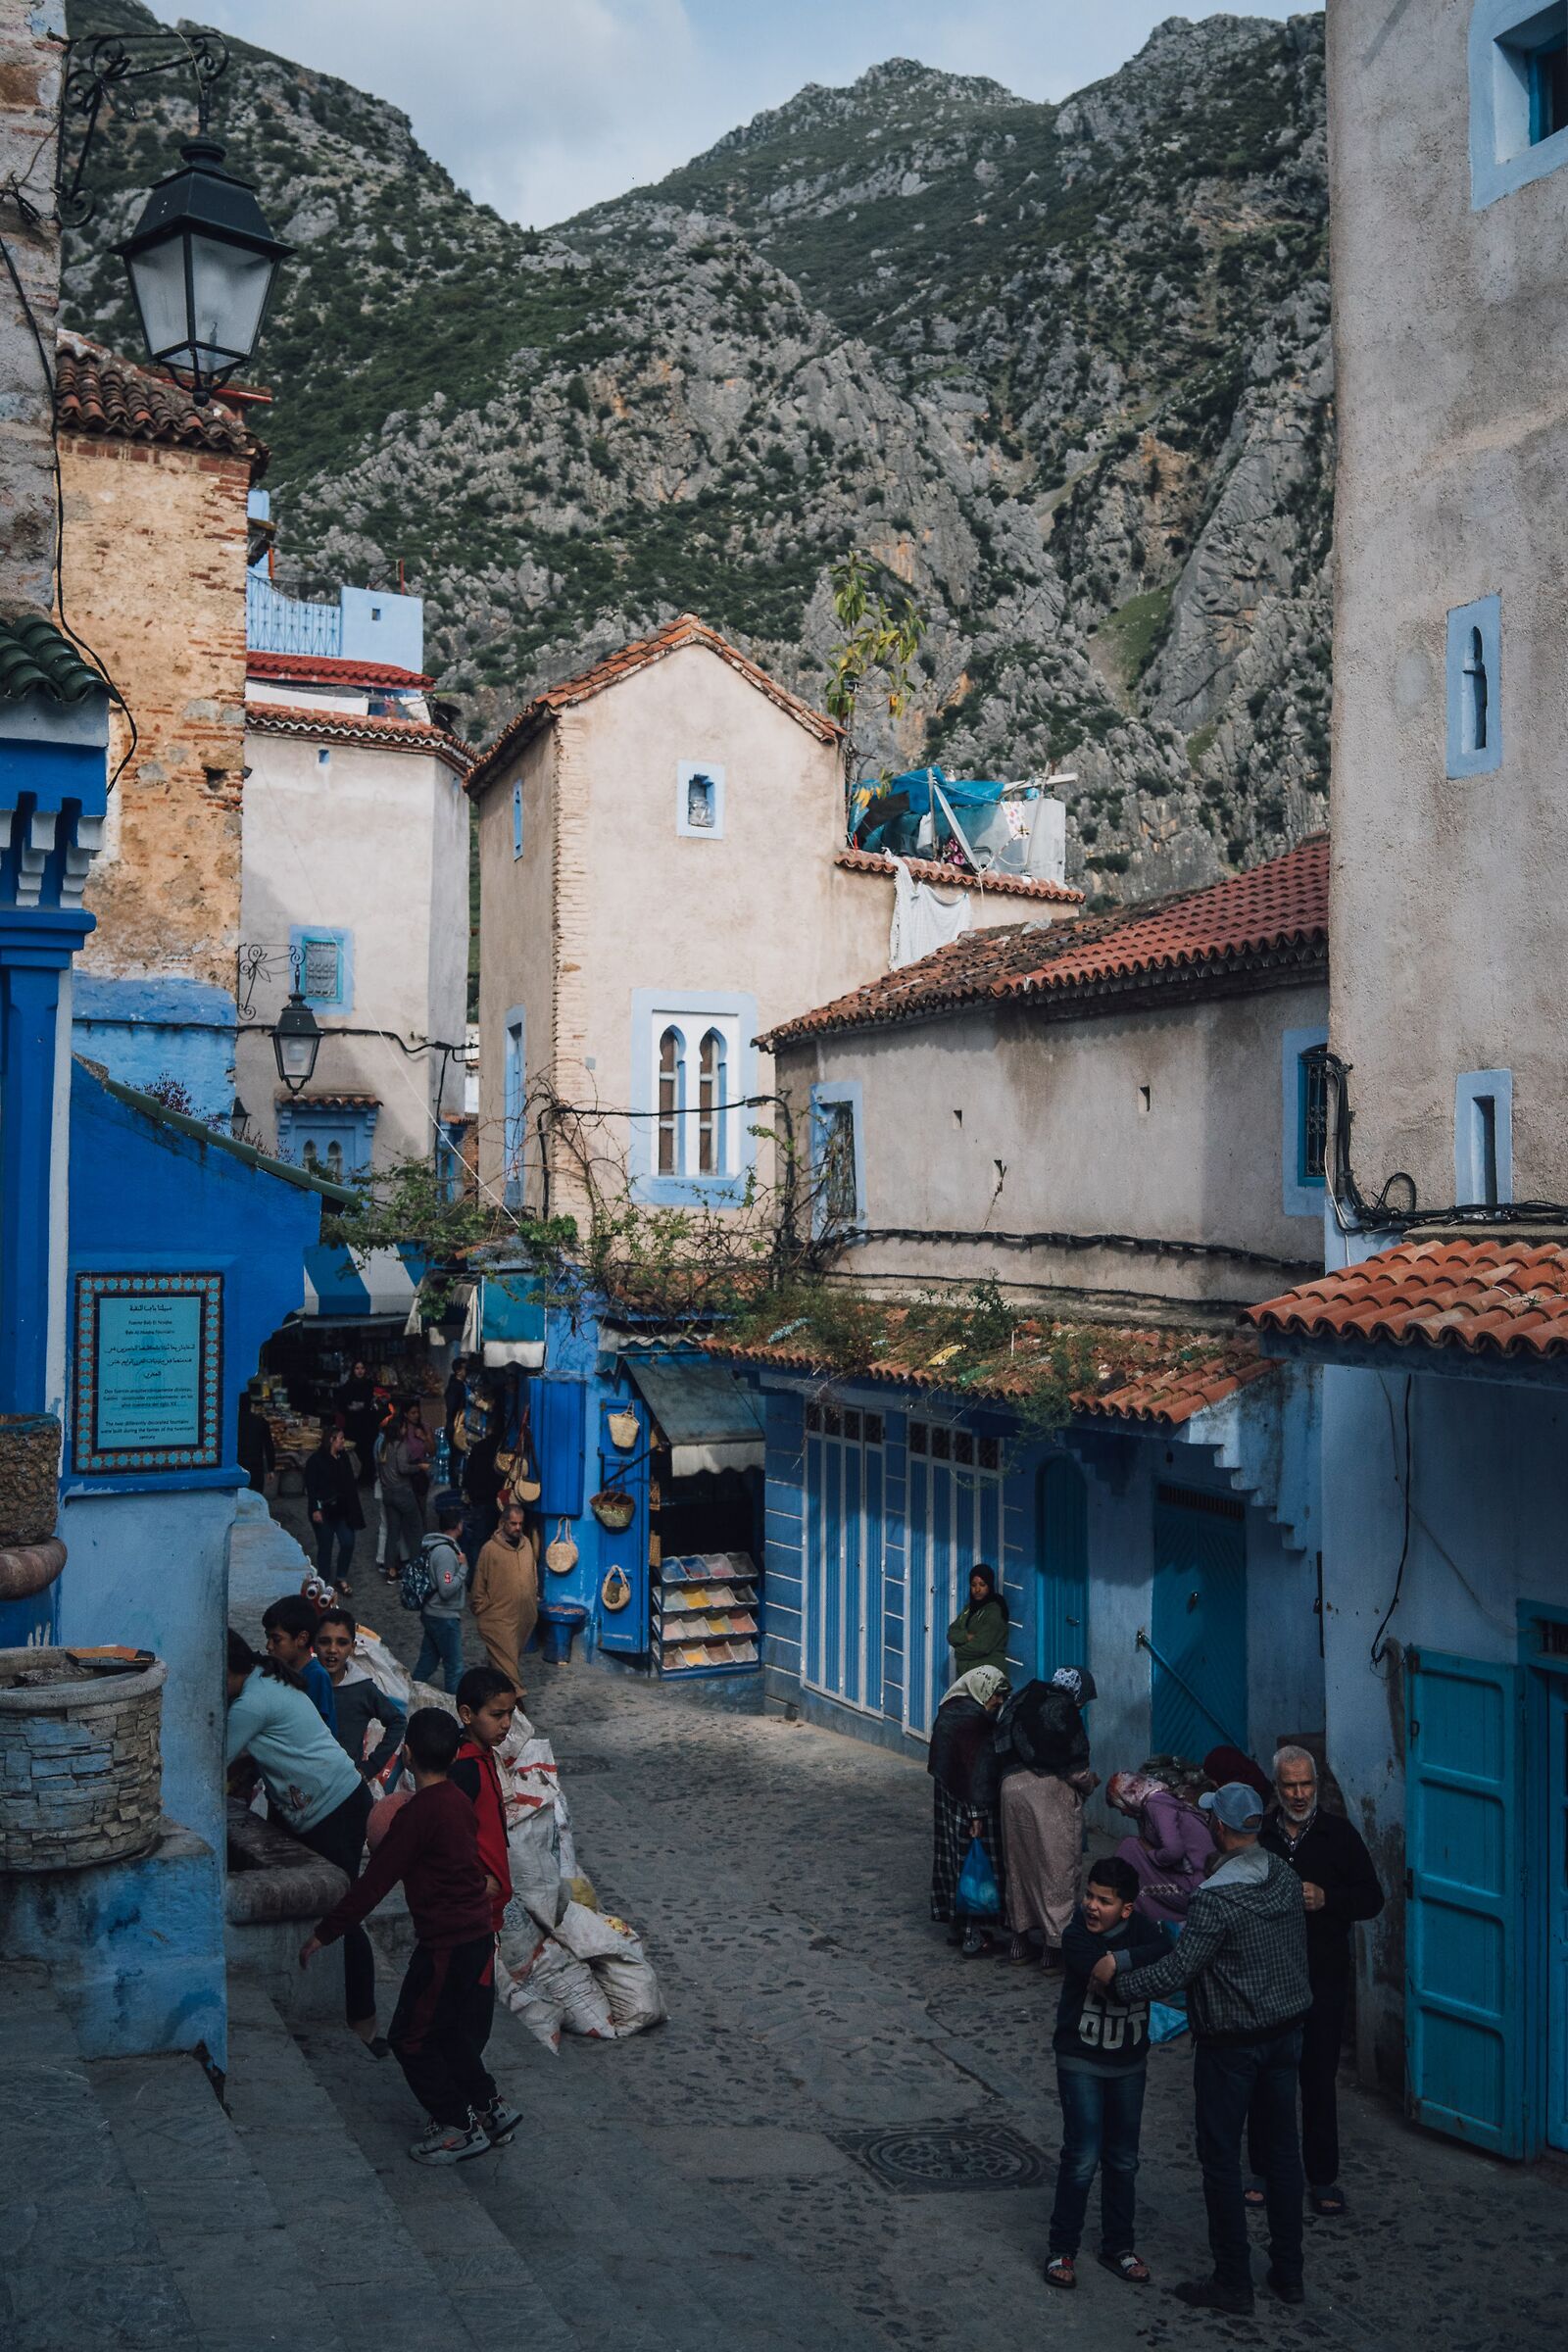 In the streets of Chefchaouen...